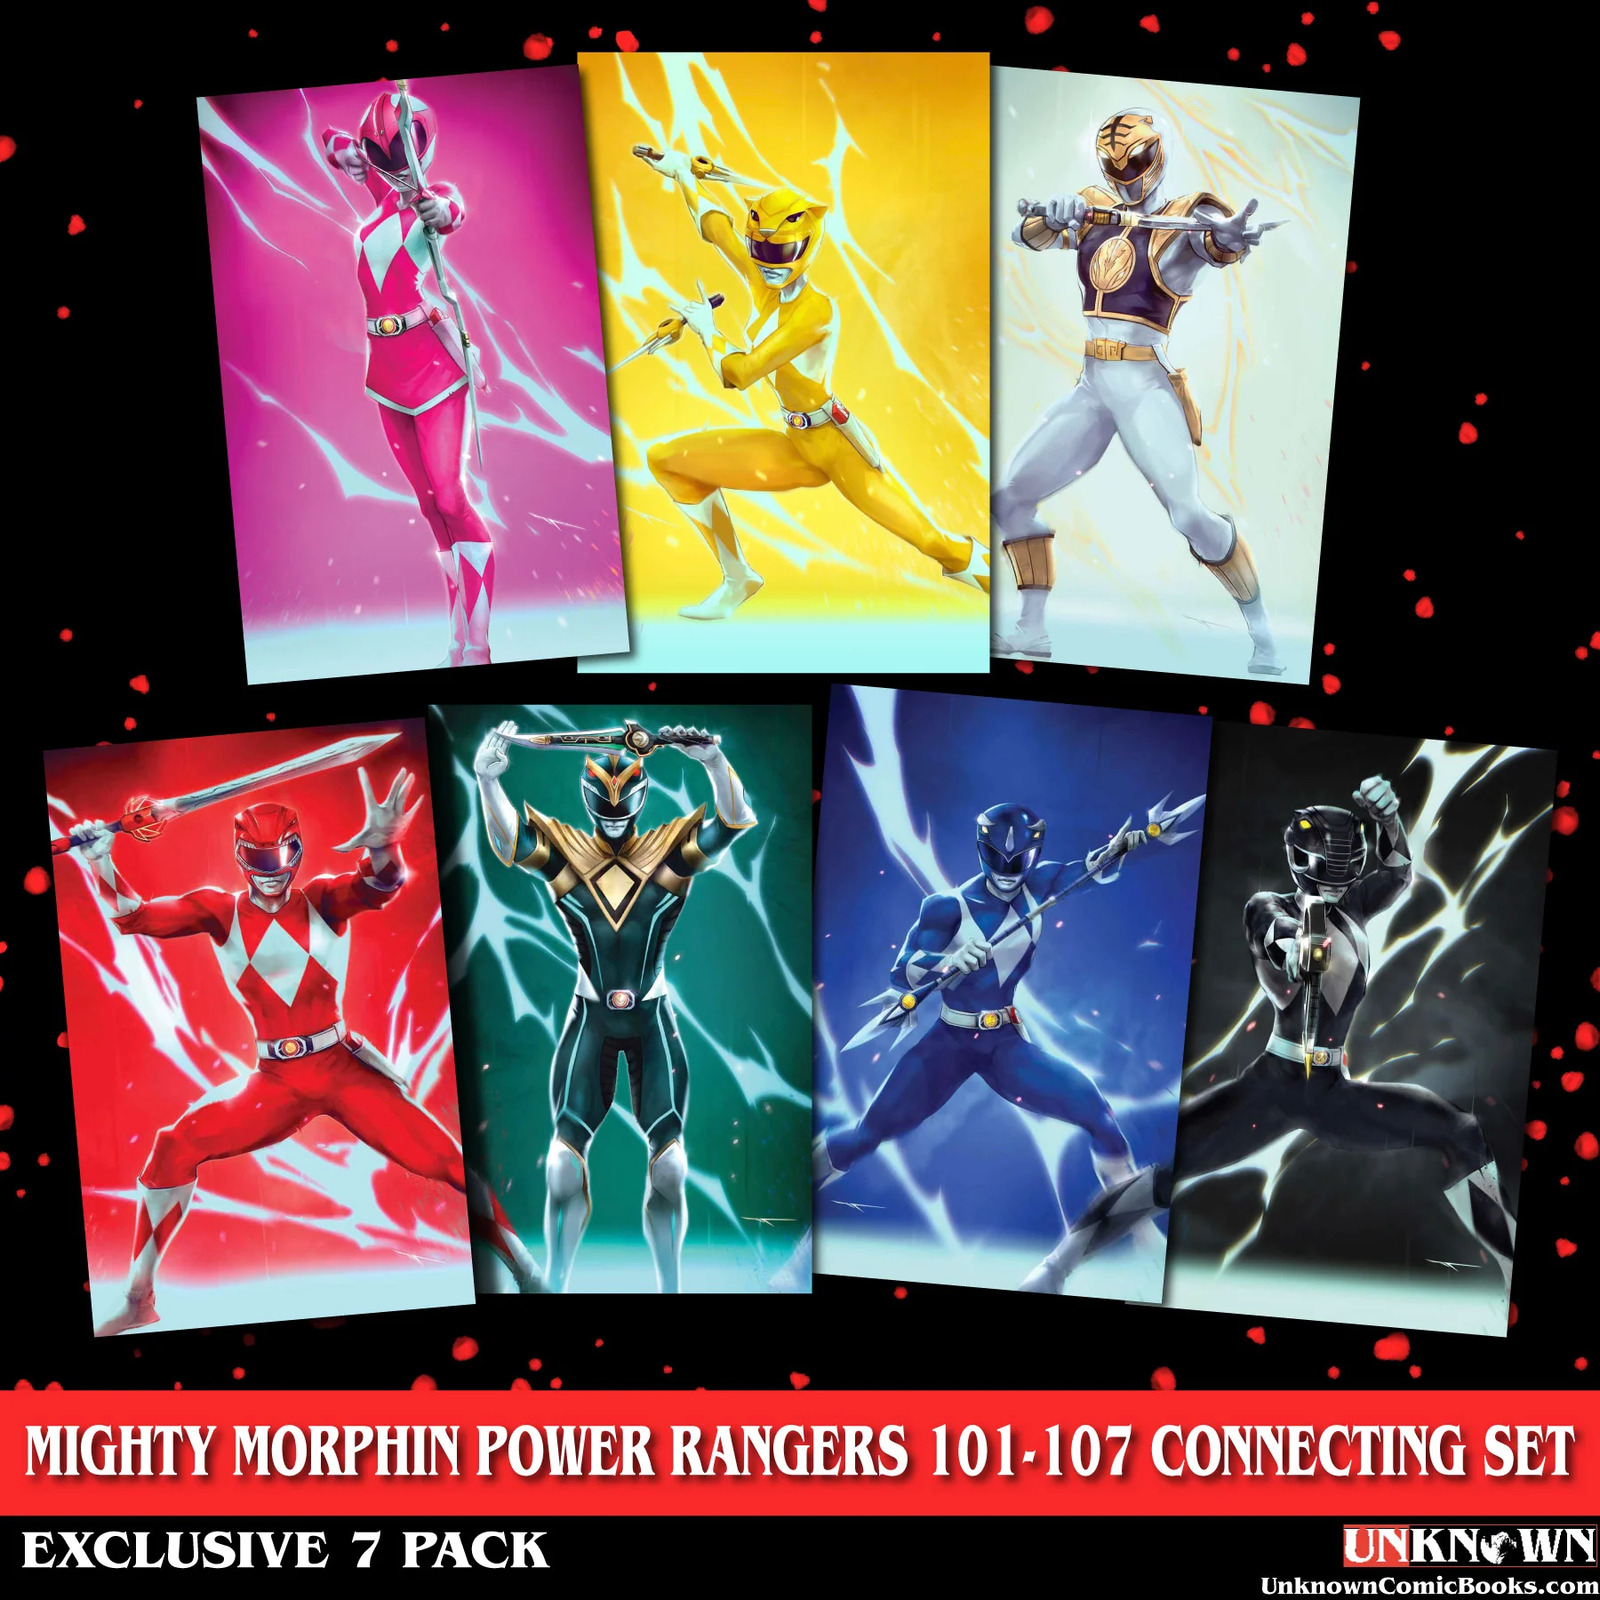 [7 PACK CONNECTING VIRGIN SET] MIGHTY MORPHIN POWER RANGERS 101, 102, 103, 104,